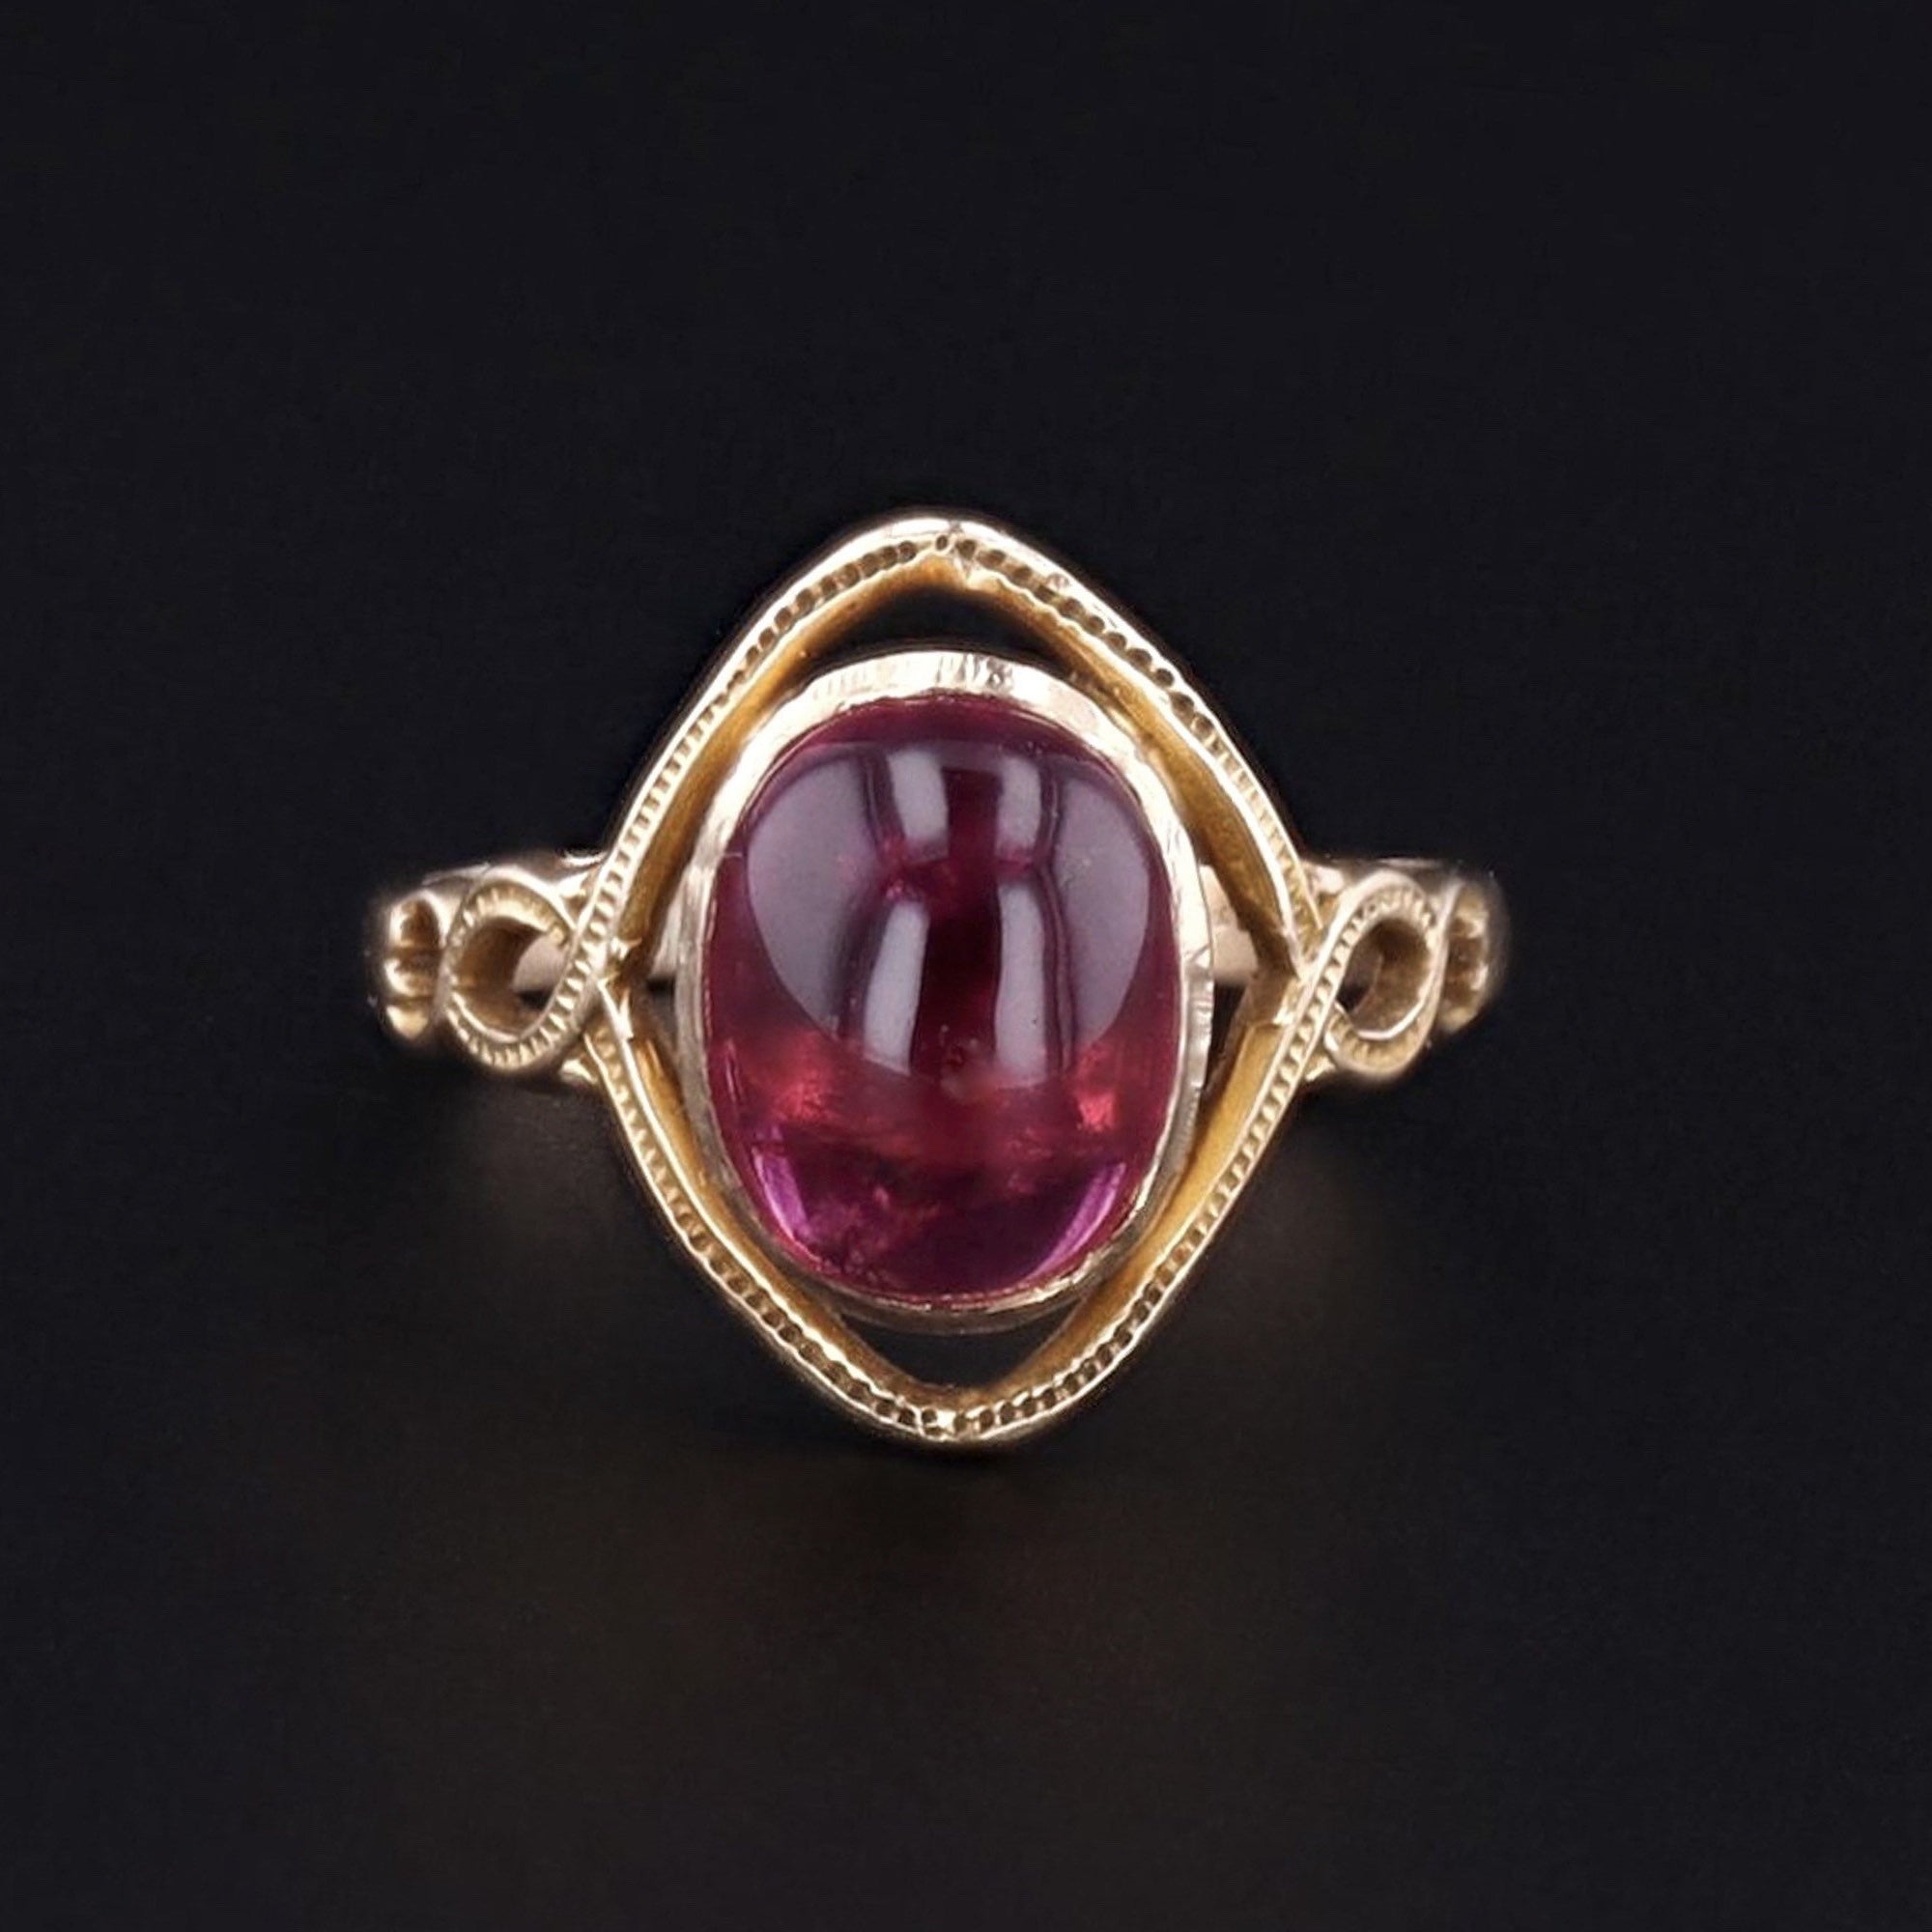 Pink Tourmaline Ring | Antique Art Nouveau Ring with Replacement Stone | 10k Gold Ring